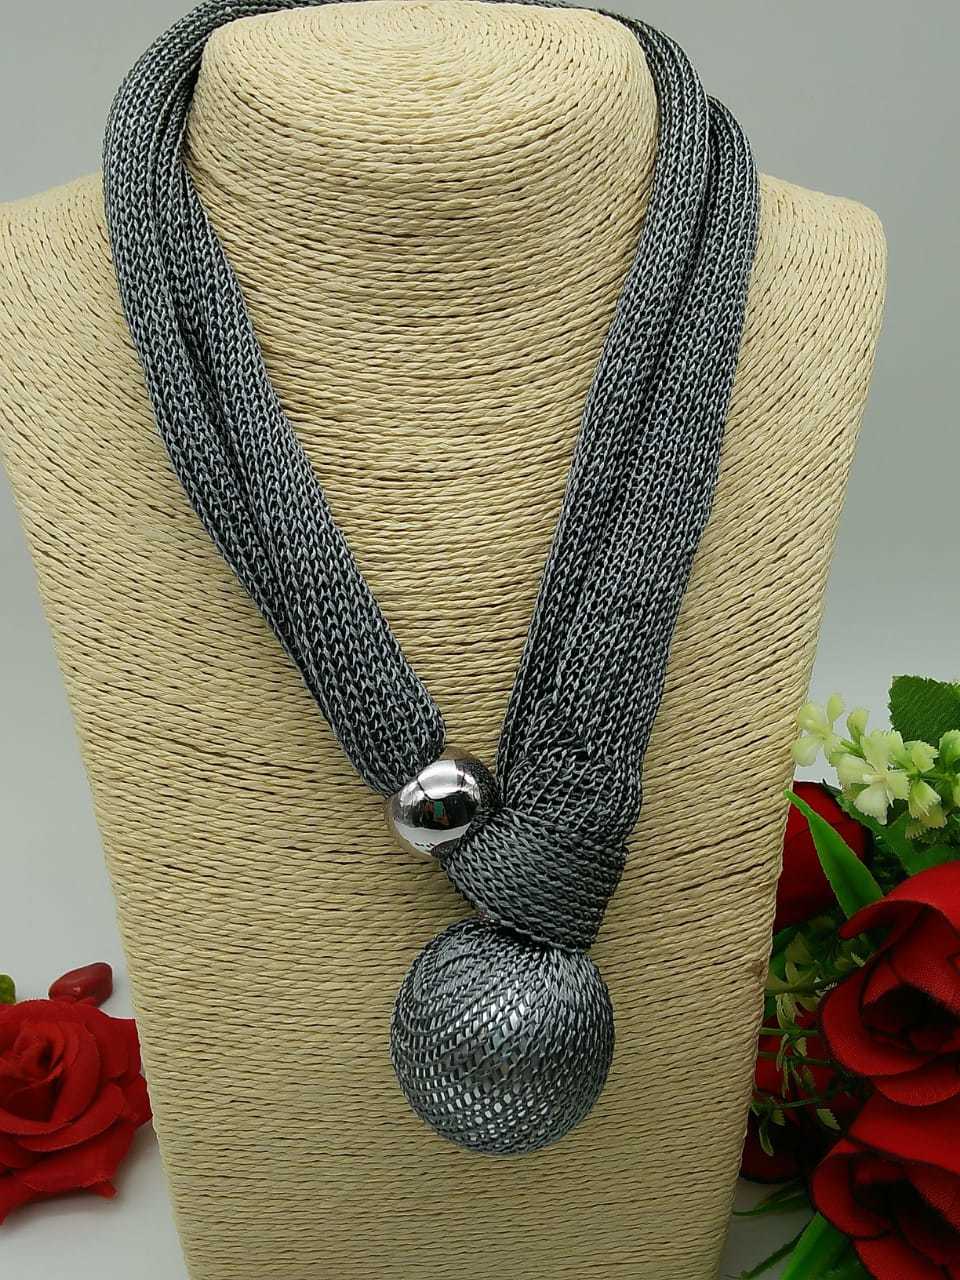 Fabric Net Necklace